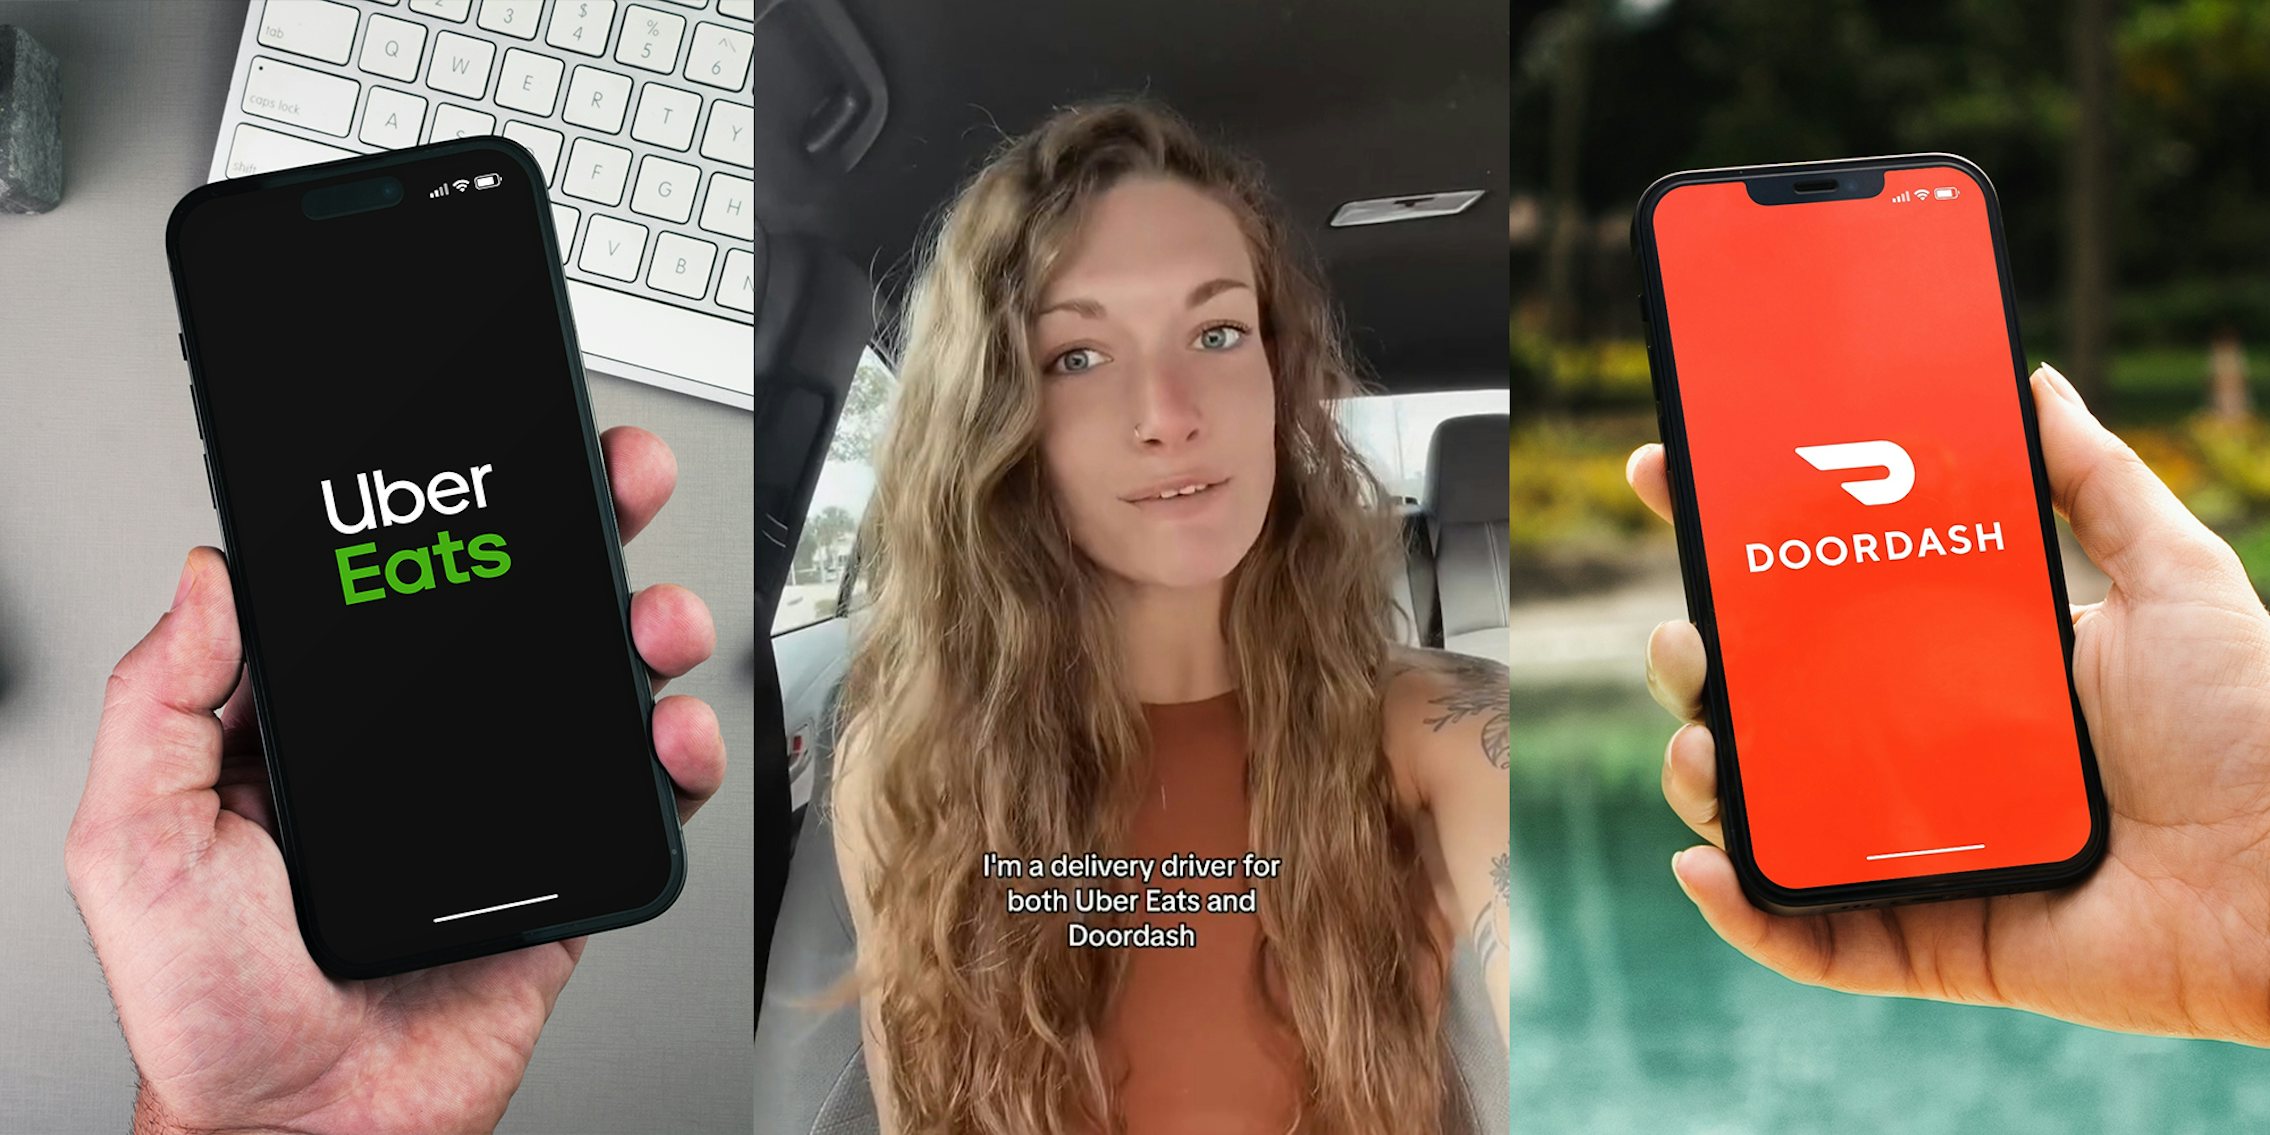 DoorDash and Uber Eats driver shares what orders she accepts vs. which ones she declines